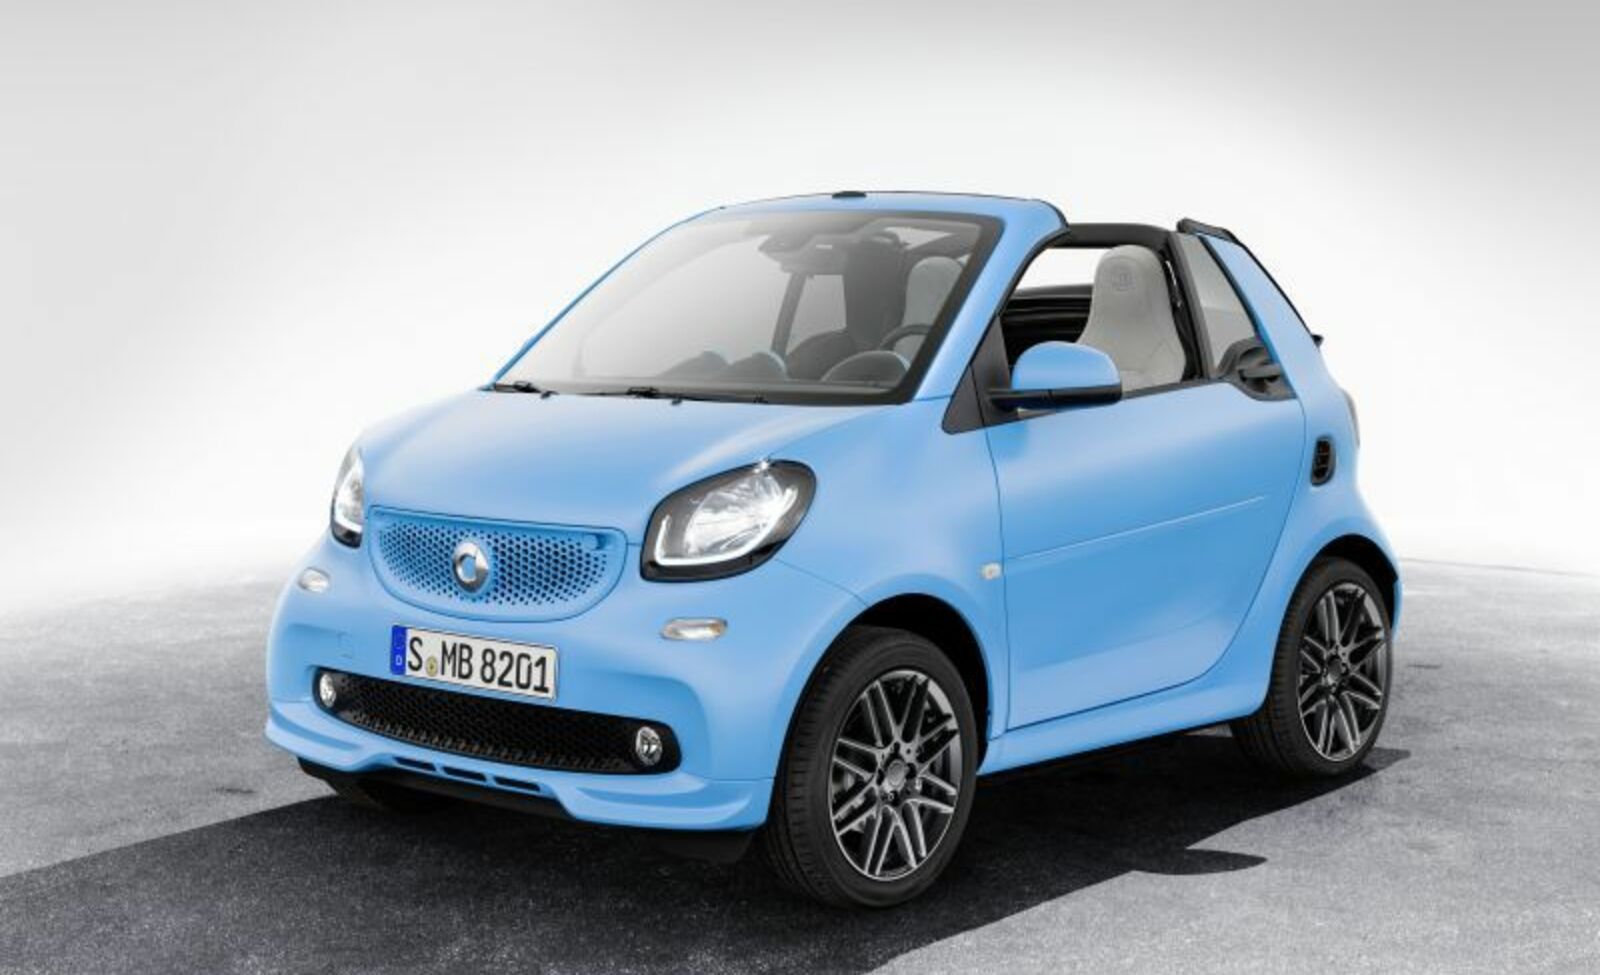 Smart Fortwo III cabrio (A453) 17.6 kWh (82 Hp) electric drive 2017, 2018, 2019 